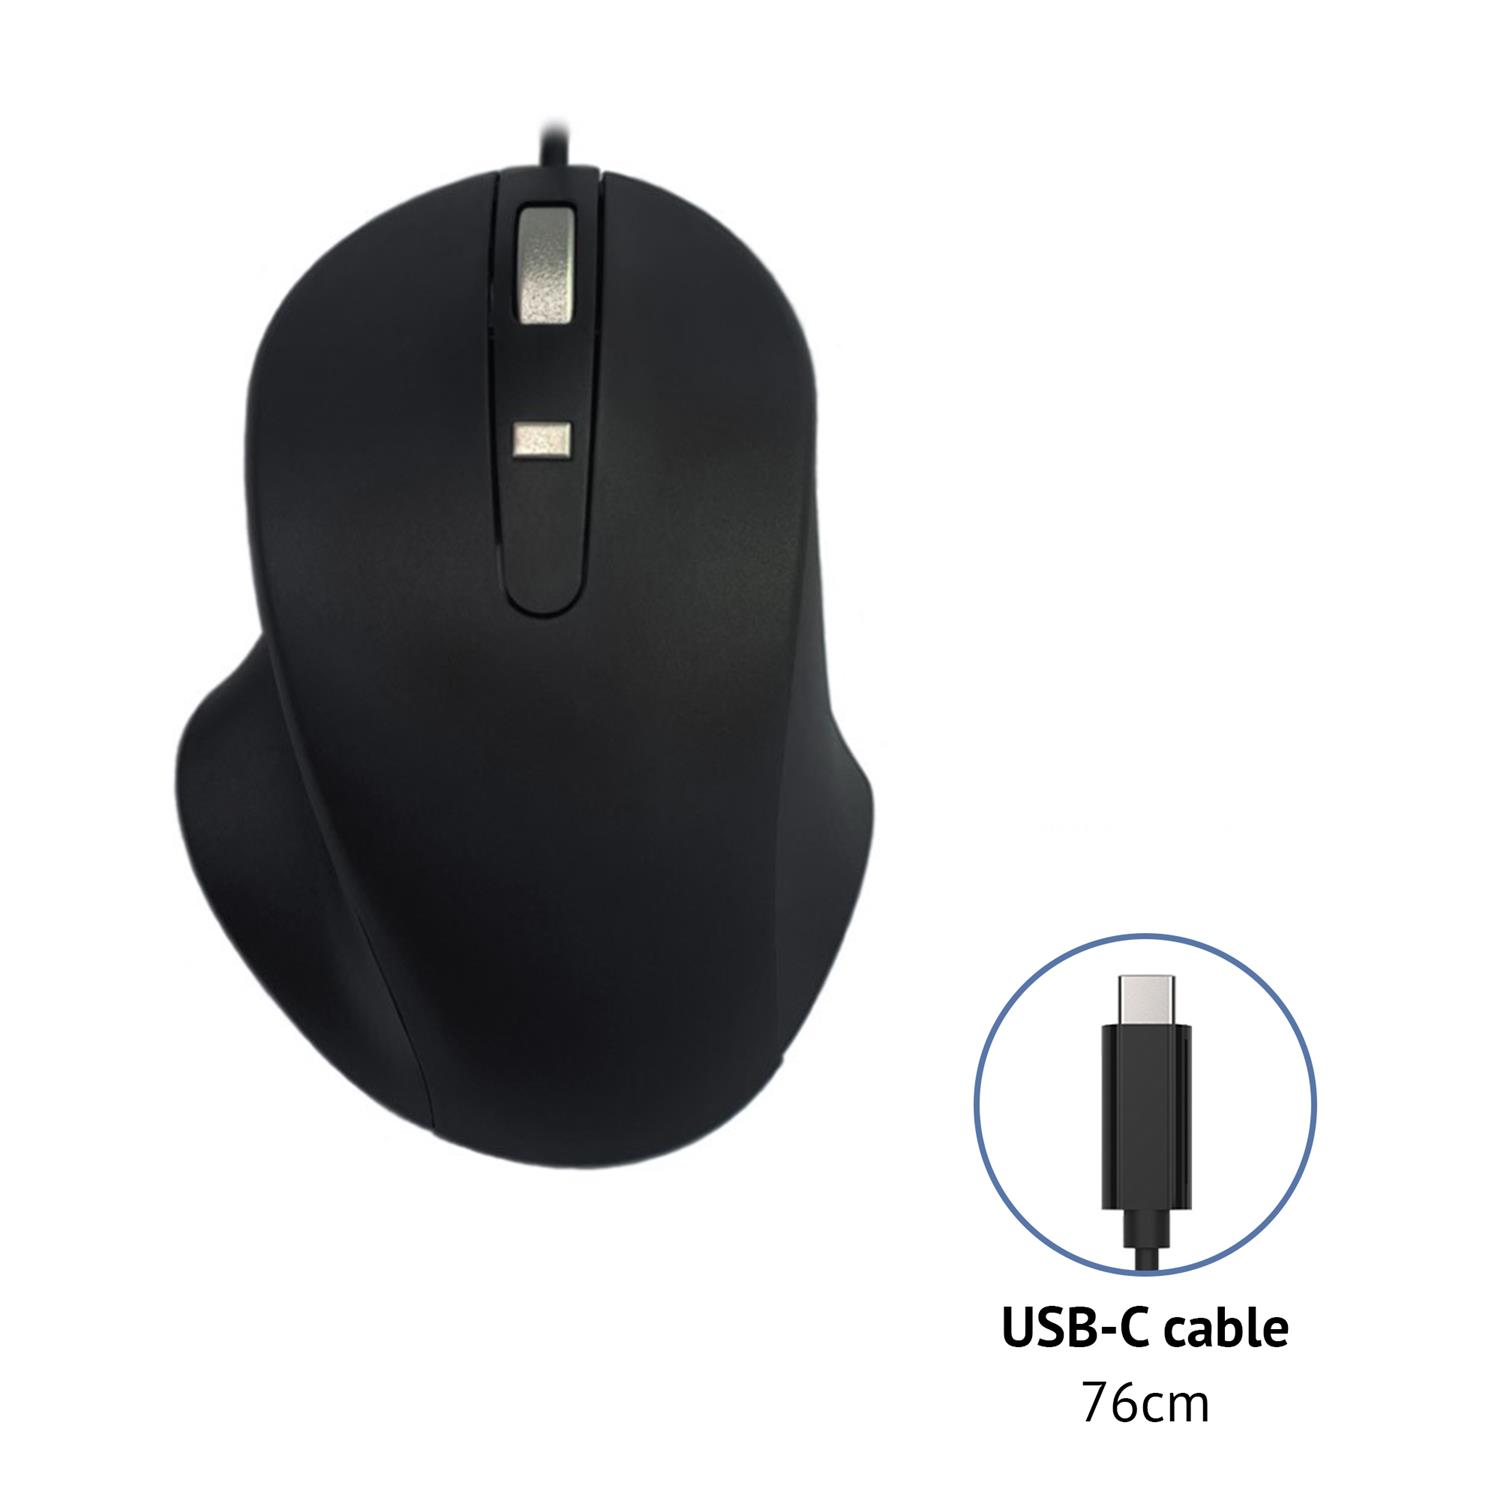 Matias USB-C mouse made of PBT, wired, black